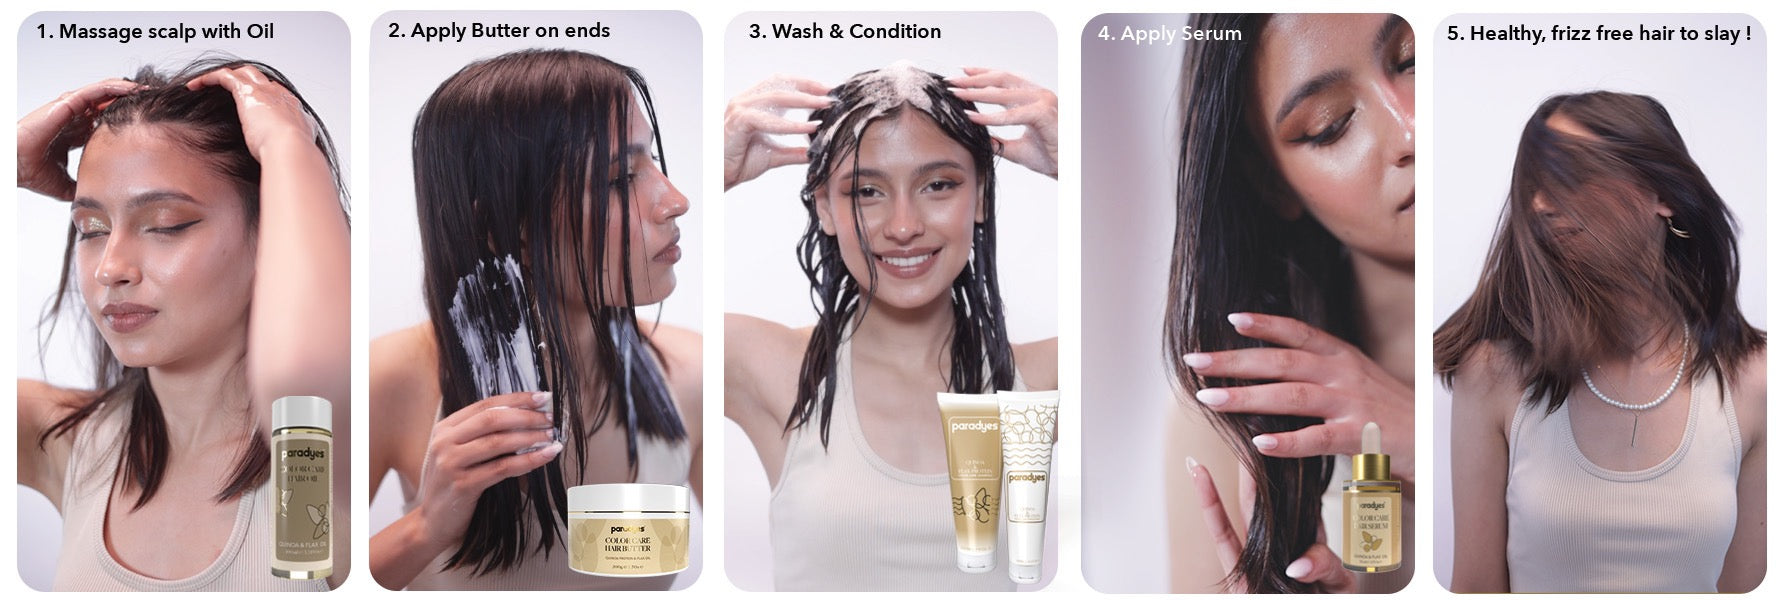 how to apply hair care products